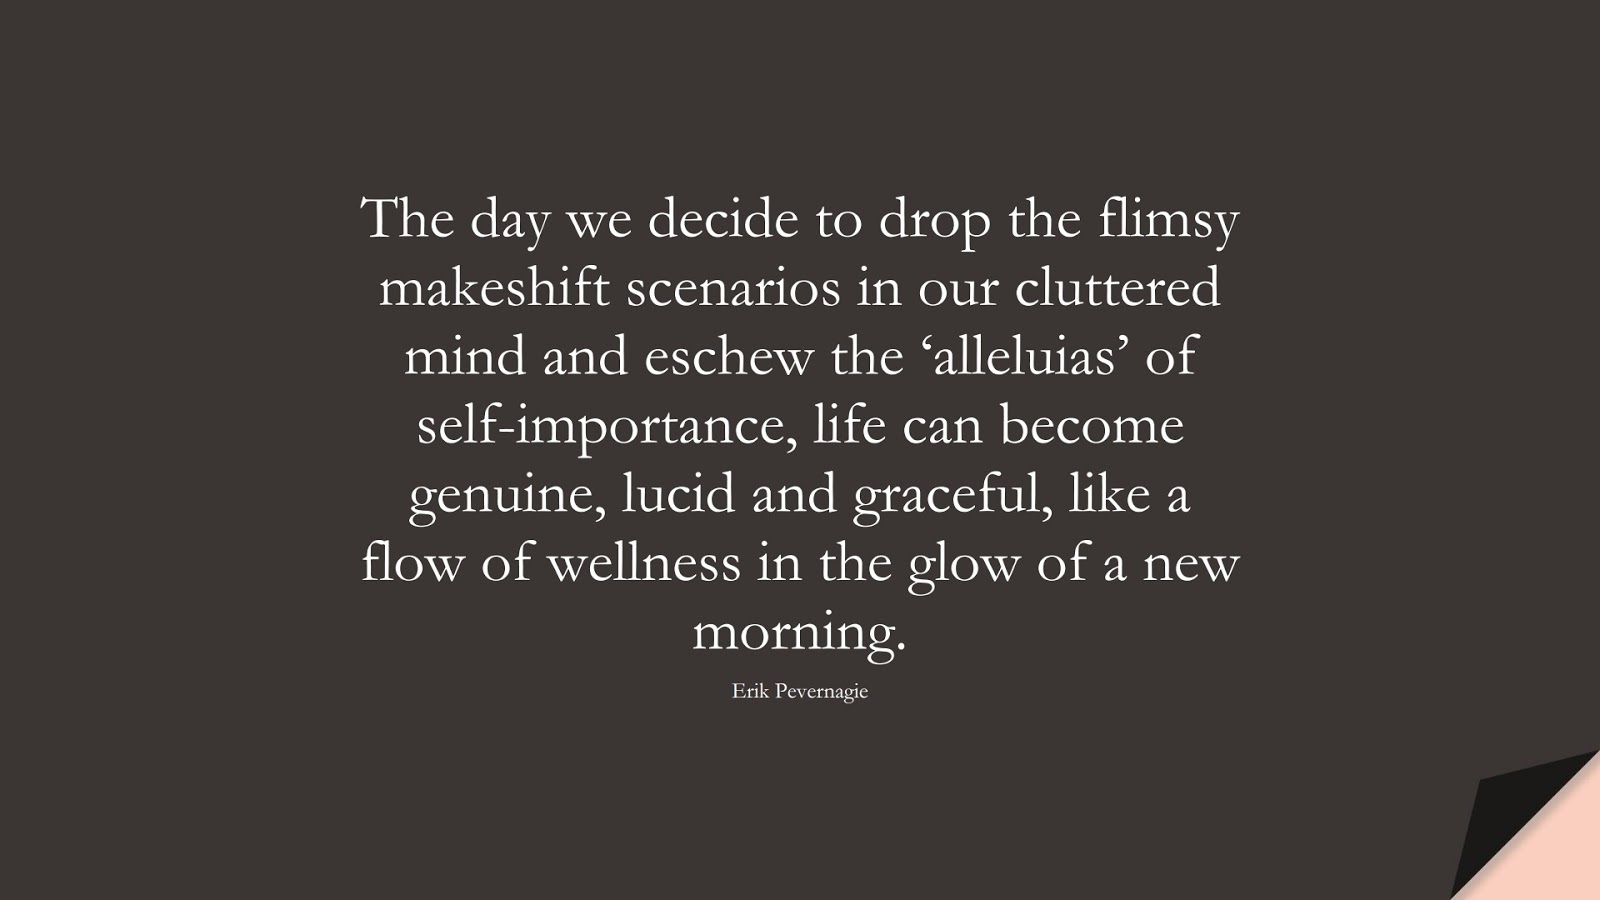 The day we decide to drop the flimsy makeshift scenarios in our cluttered mind and eschew the ‘alleluias’ of self-importance, life can become genuine, lucid and graceful, like a flow of wellness in the glow of a new morning. (Erik Pevernagie);  #HealthQuotes